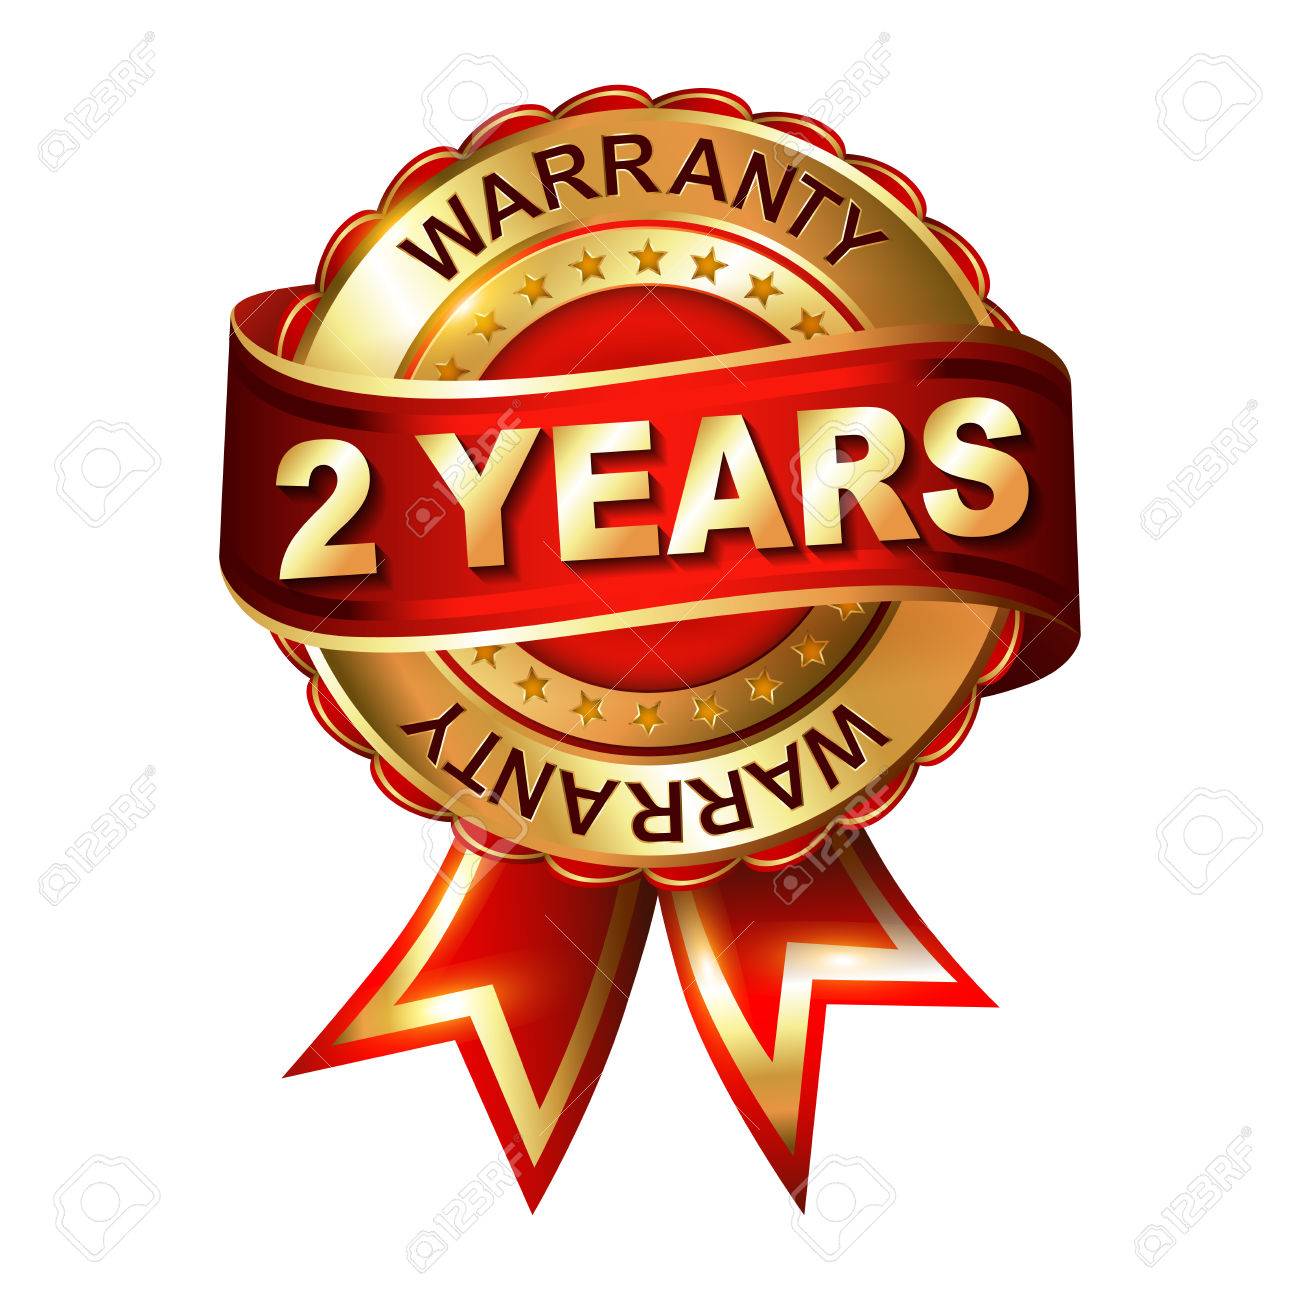 2 Year Extended Warranty For Televisions Under $6500